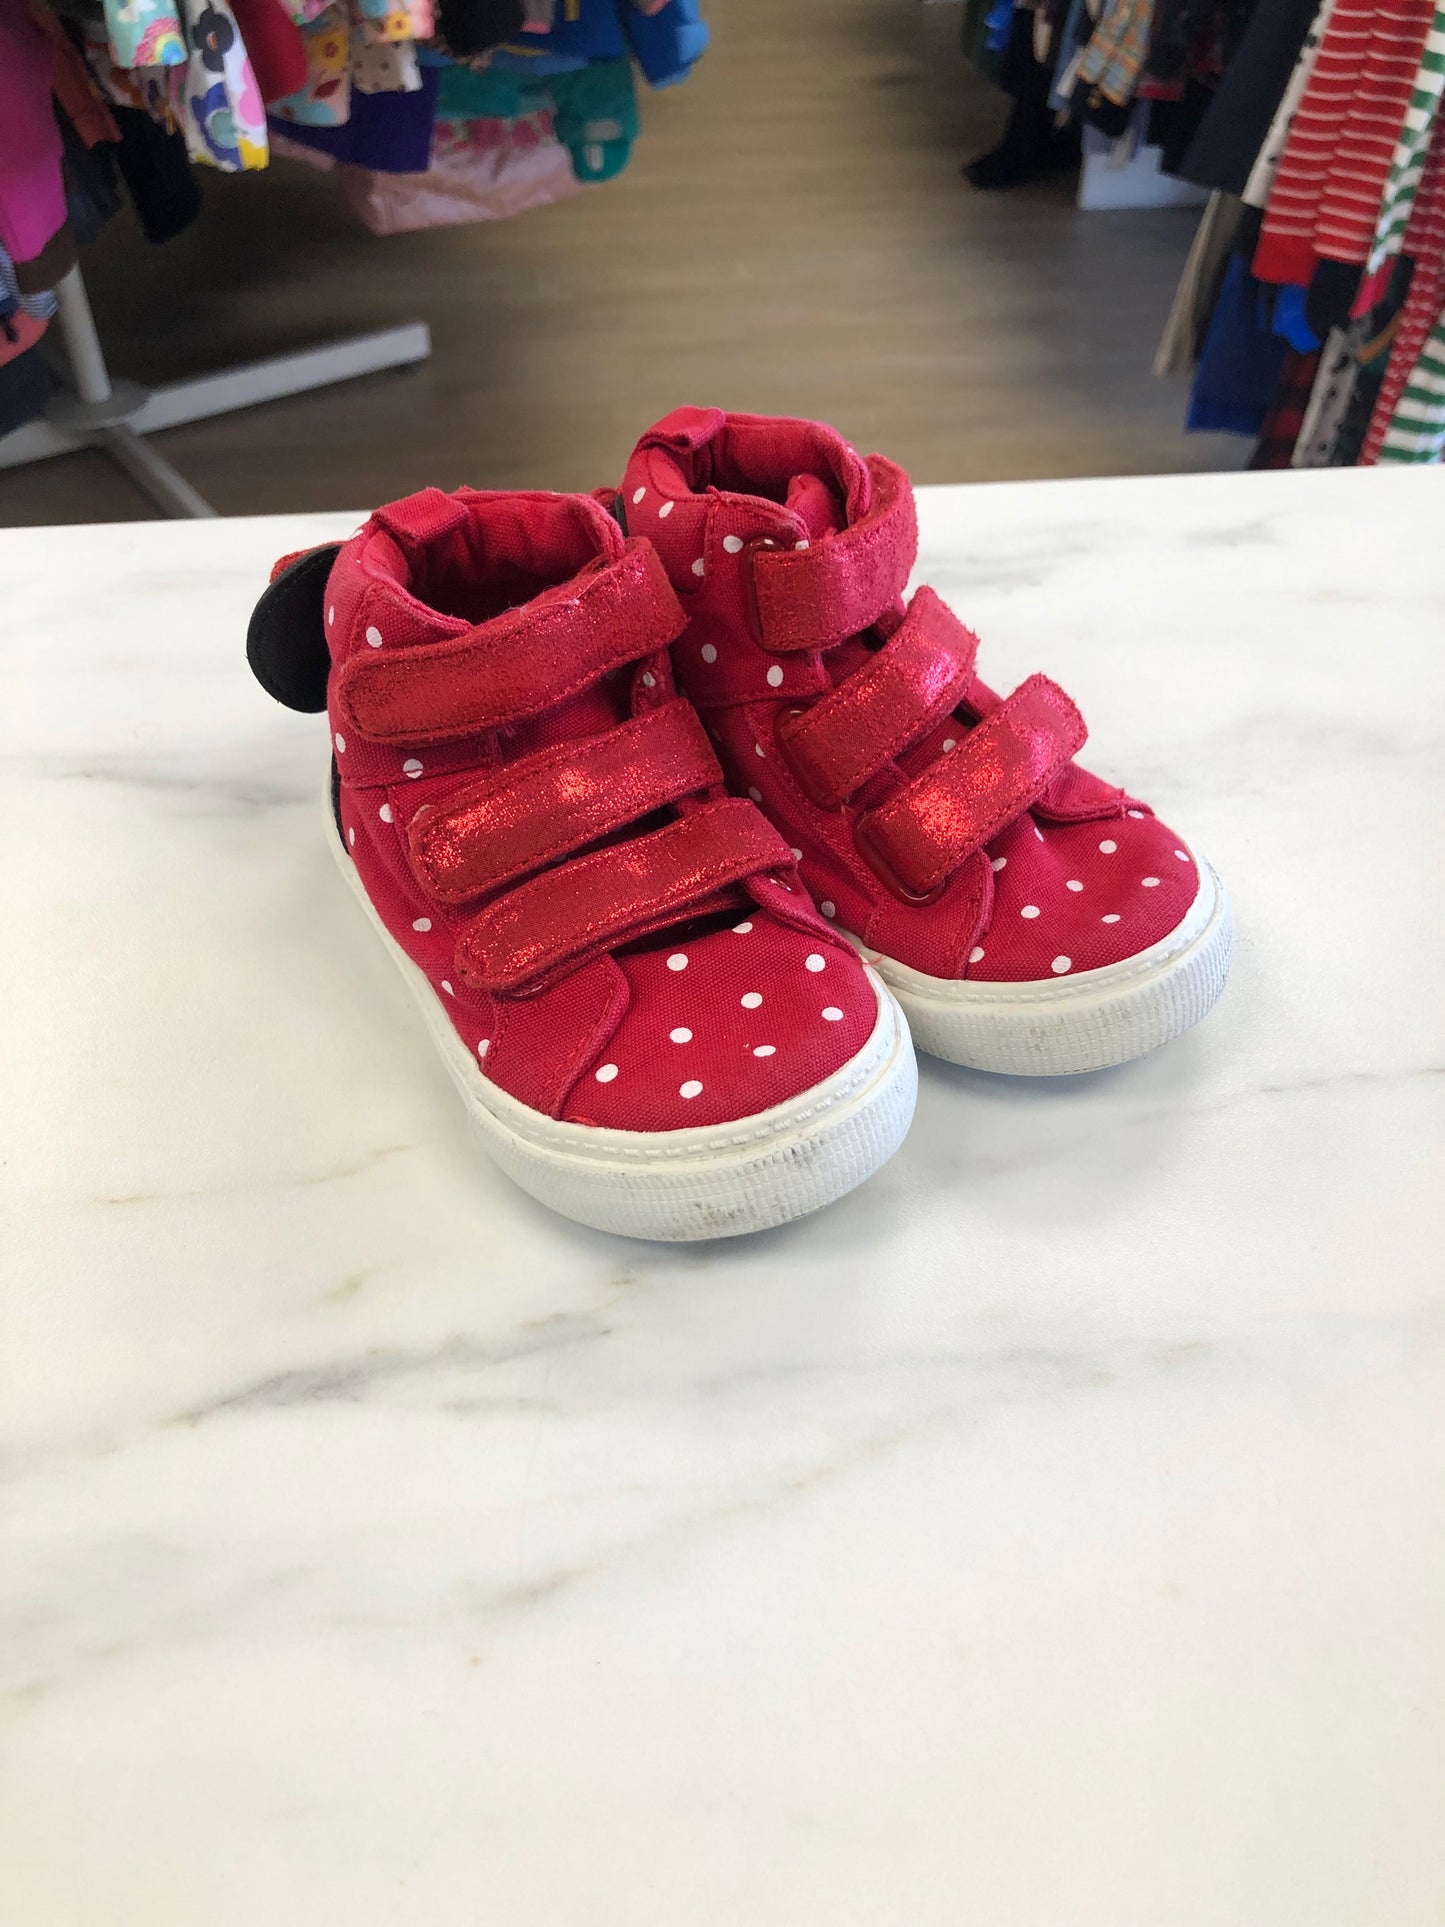 GAP Child Size 7 Red polka dot Shoes/Boots